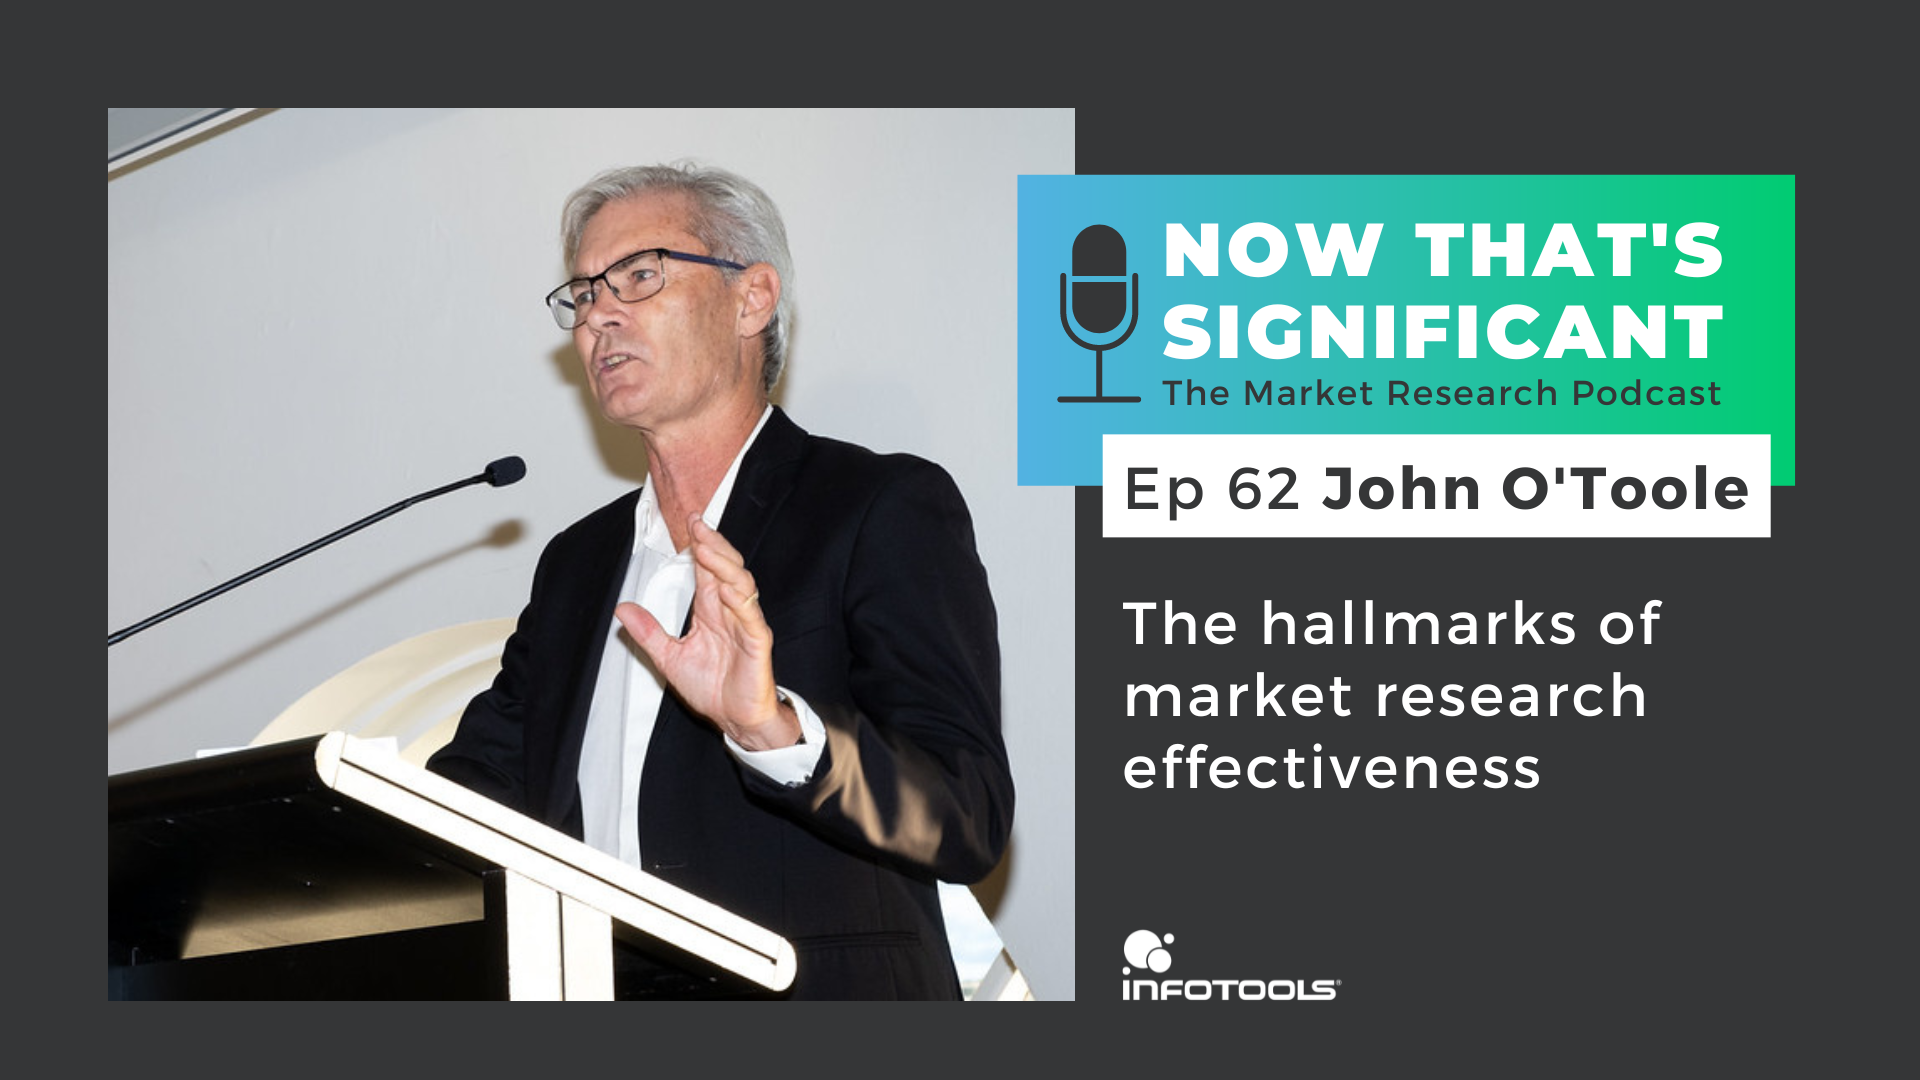 Now that's Significant - The hallmarks of market research effectiveness with John O'Toole